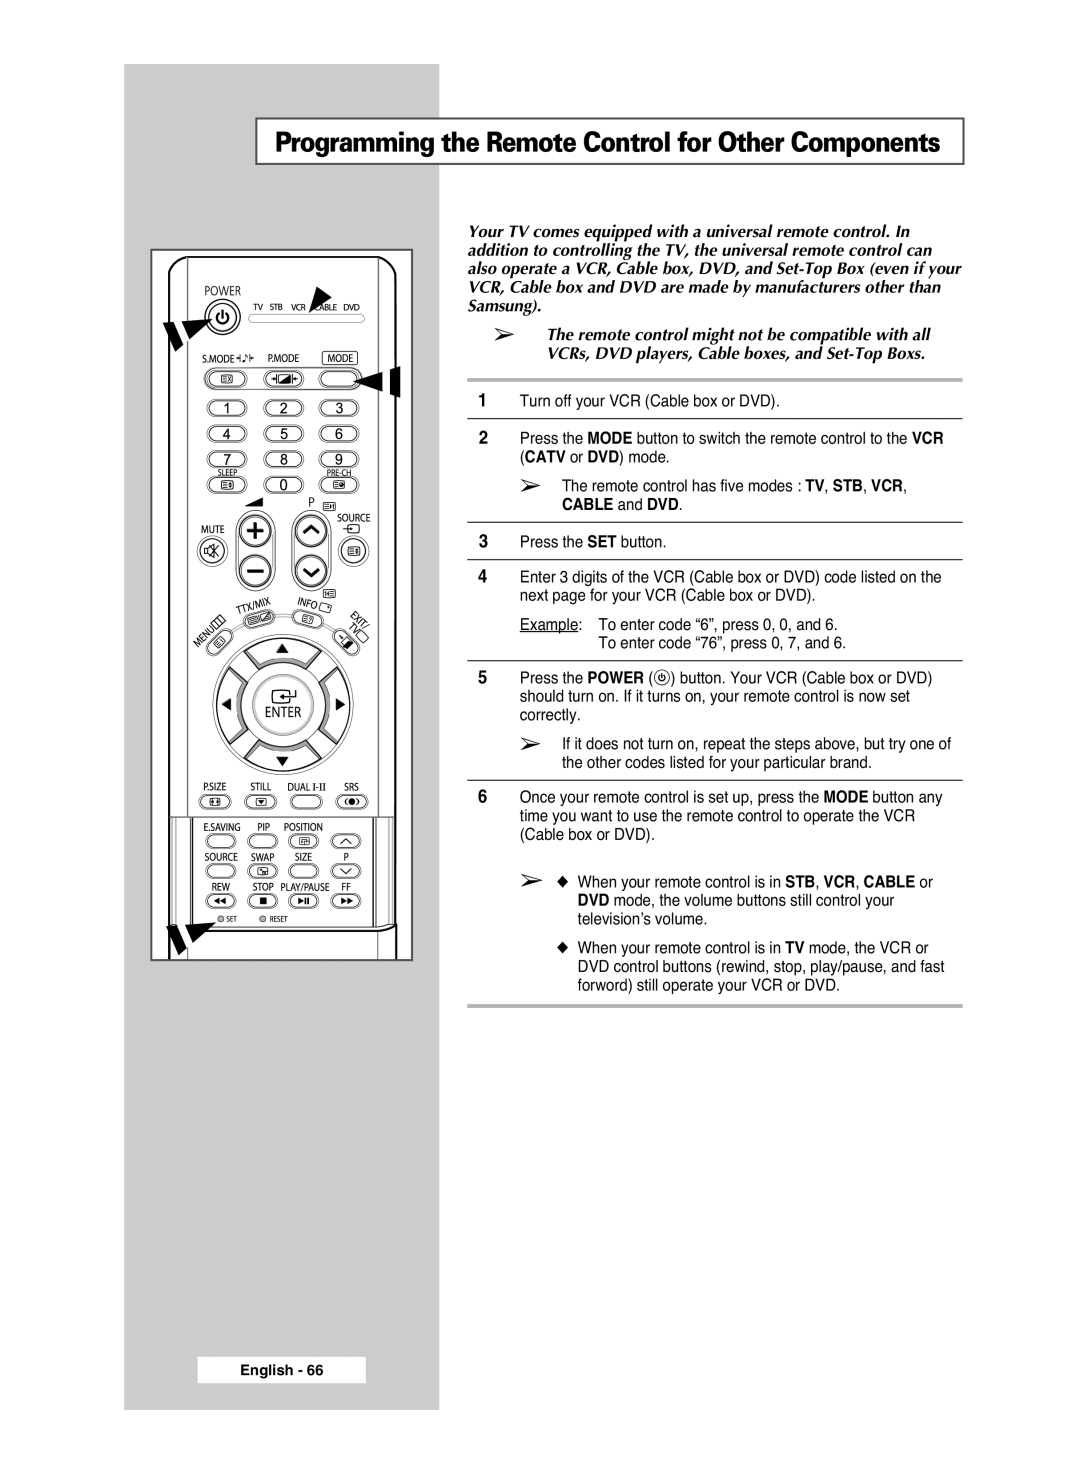 Samsung PS-42S5S manual Programming the Remote Control for Other Components, Samsung 